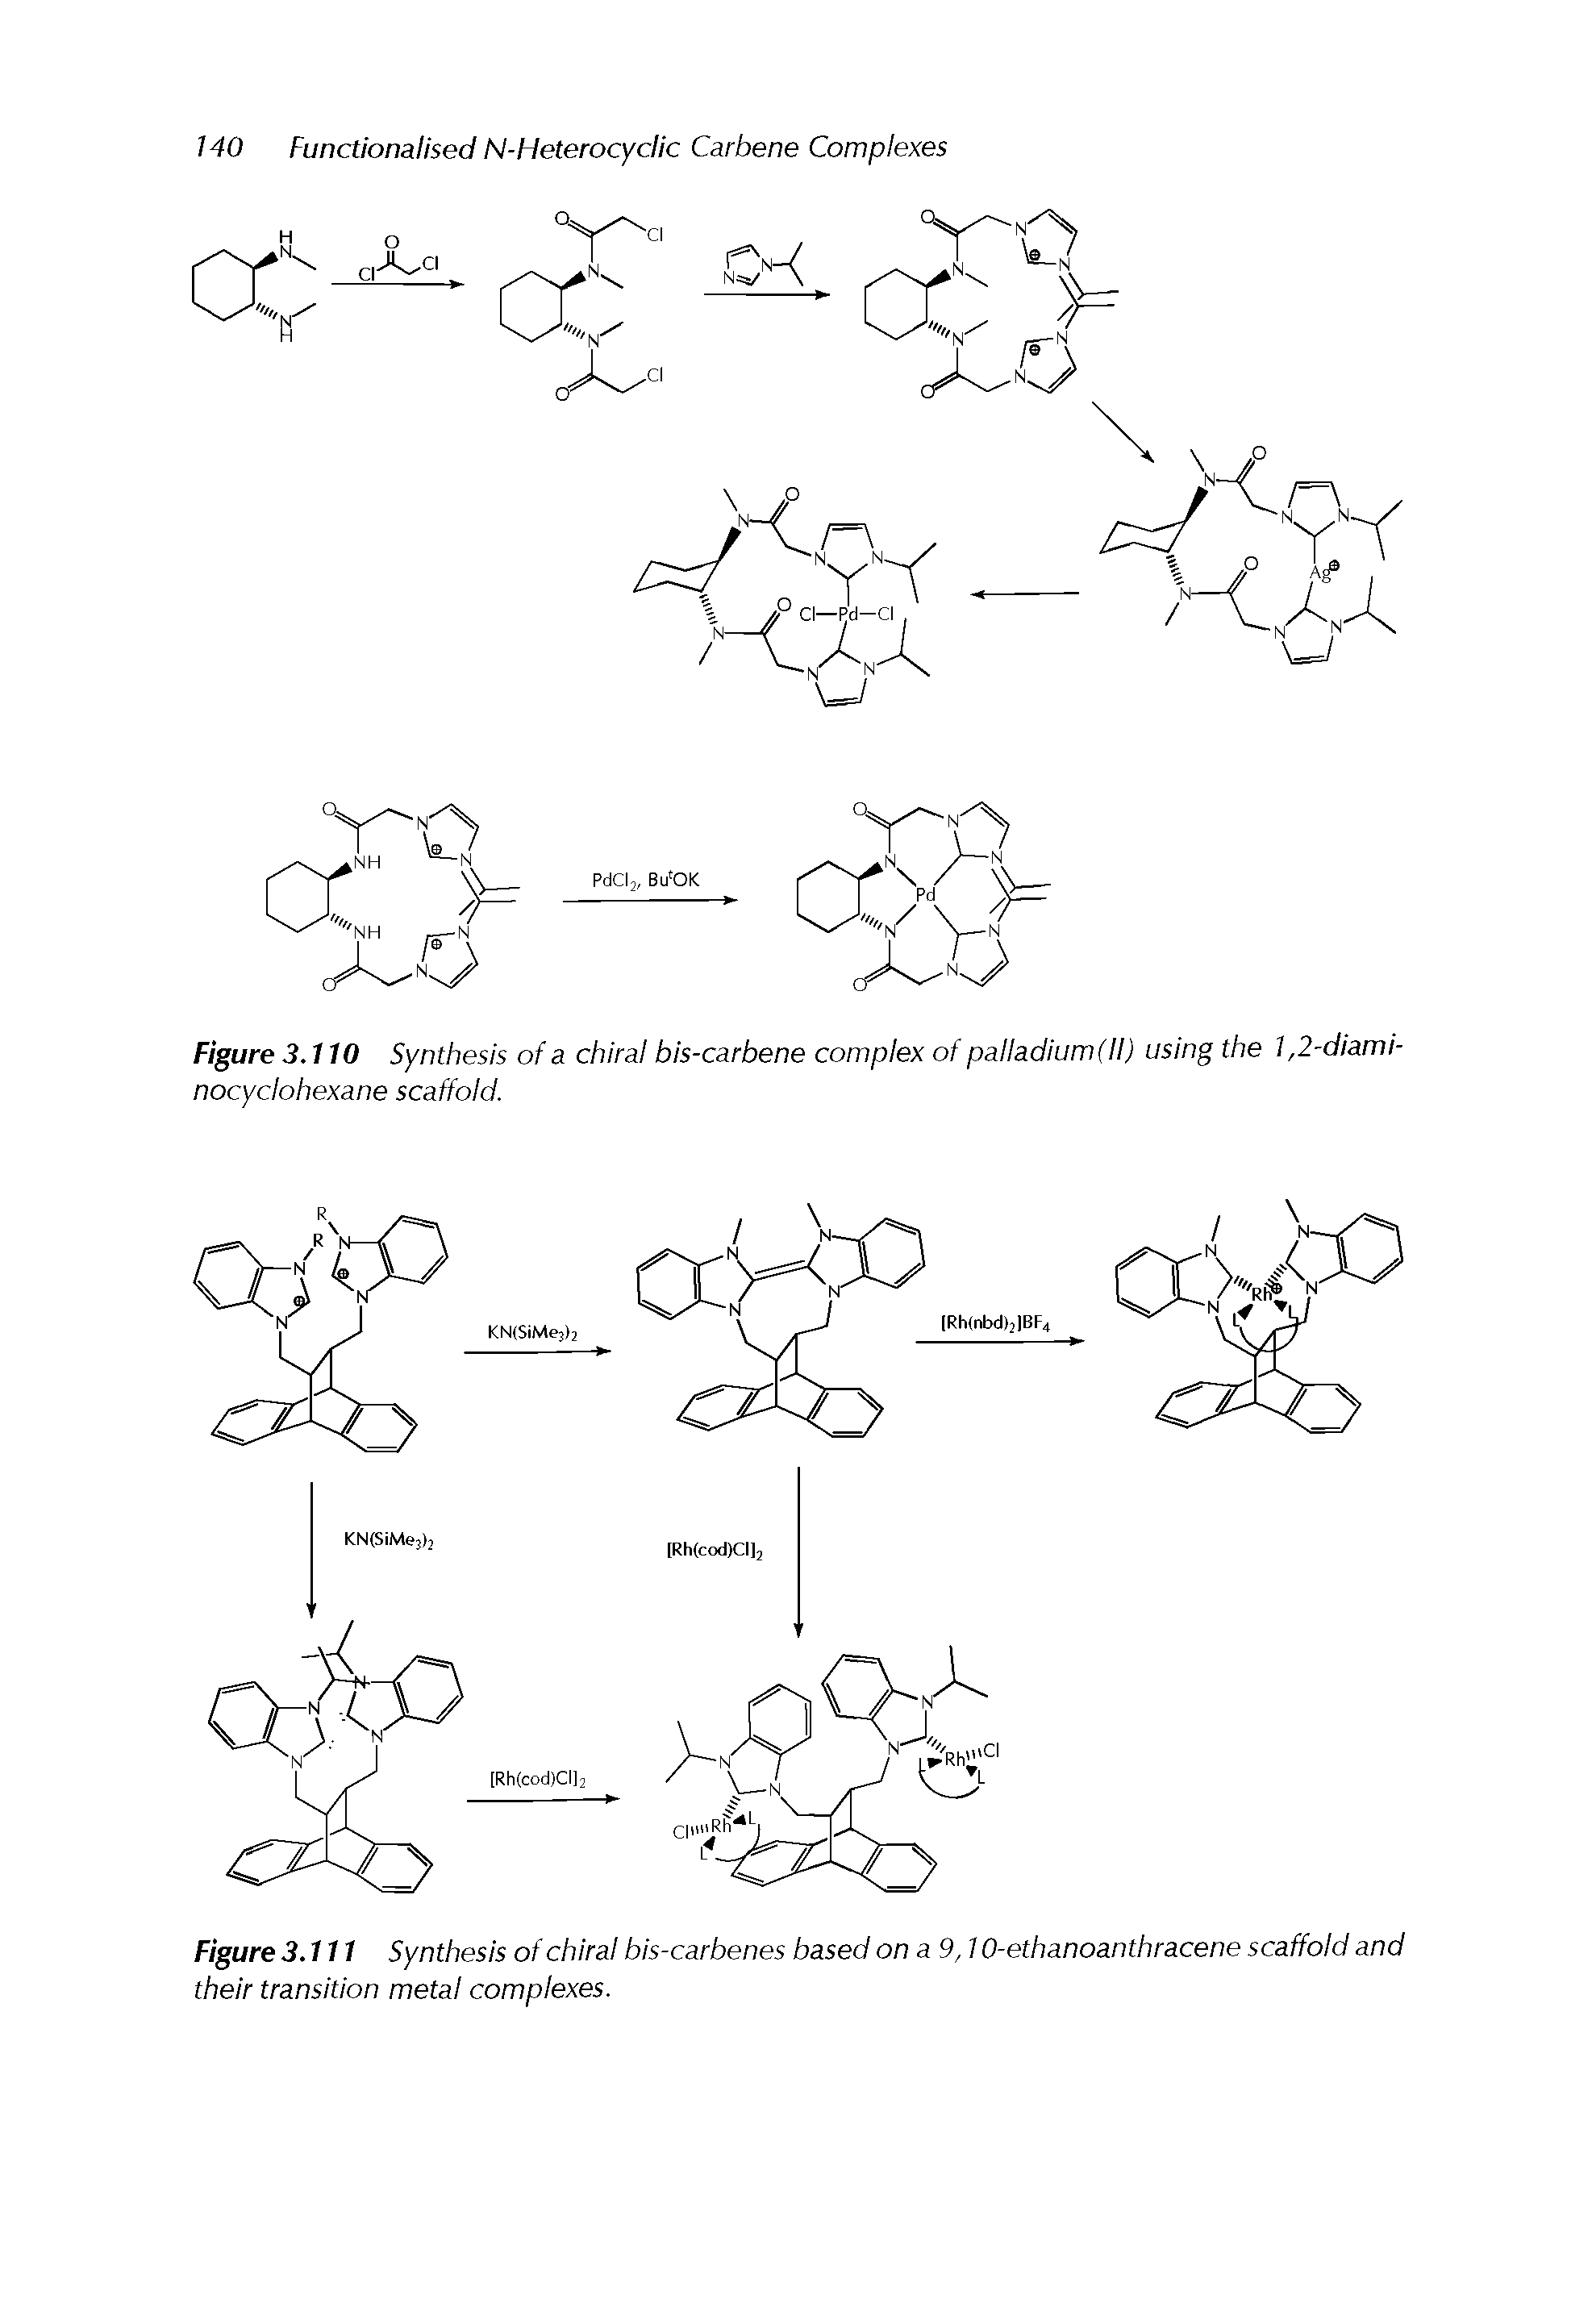 Figure 3.111 Synthesis of chiral bis-carbenes based on a 9,10-ethanoanthracene scaffold and their transition metal complexes.